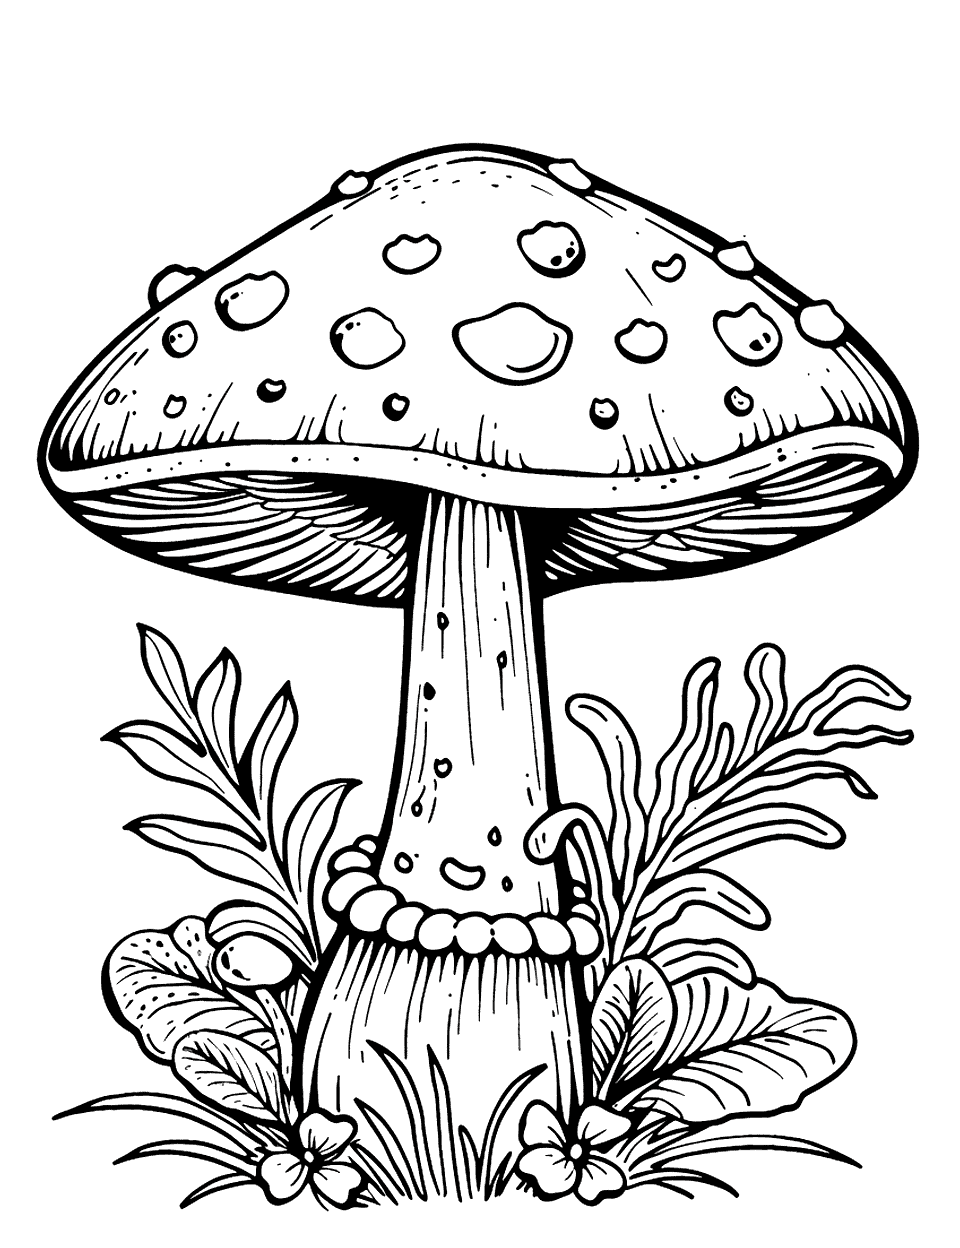 Mushroom and Ferns Coloring Page - A mushroom surrounded by lush ferns and small flowers.